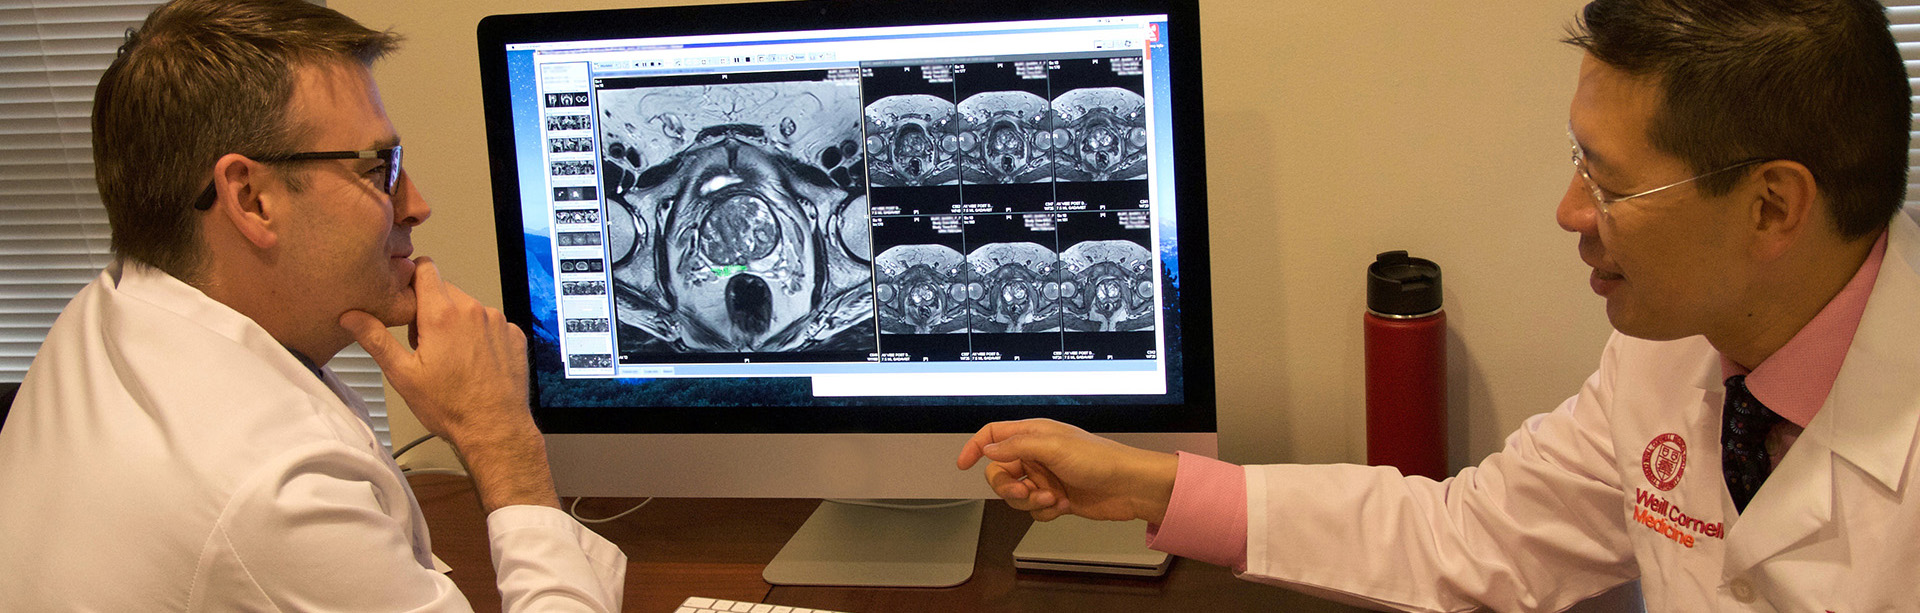 Weill Cornell Medicine physicians reviewing patient scans.